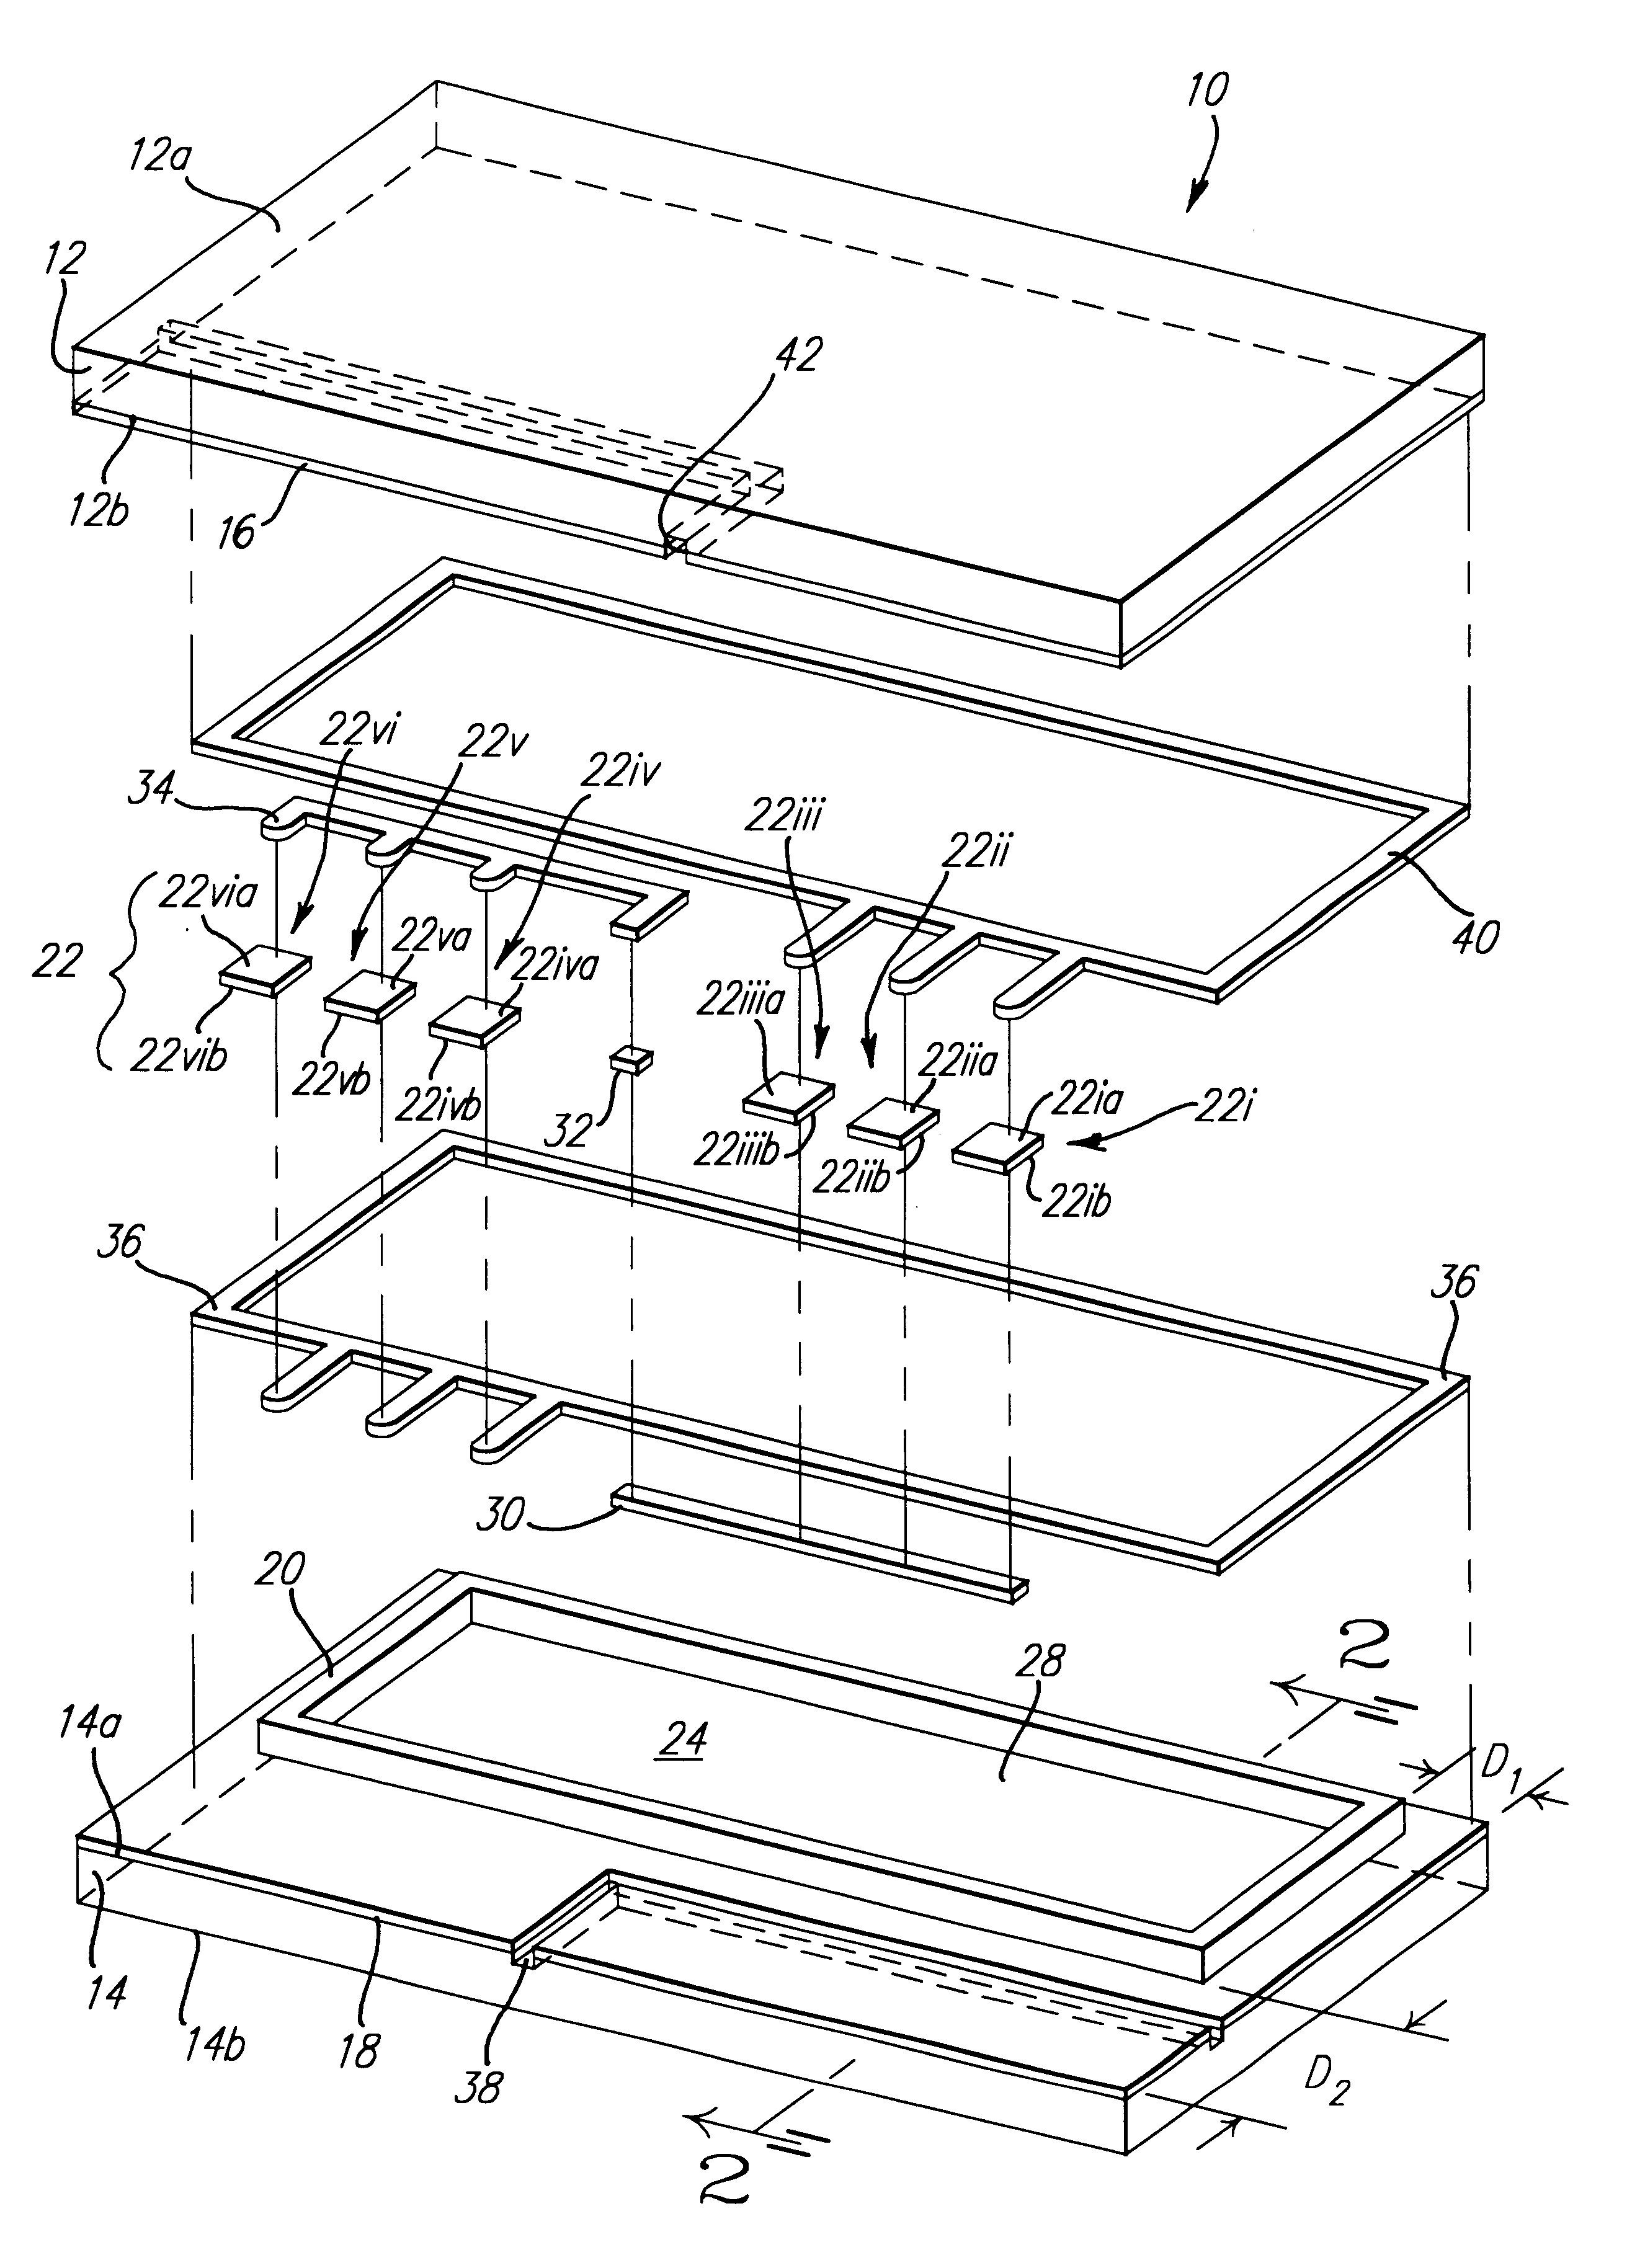 Electro-optic device incorporating a discrete photovoltaic device and method and apparatus for making same